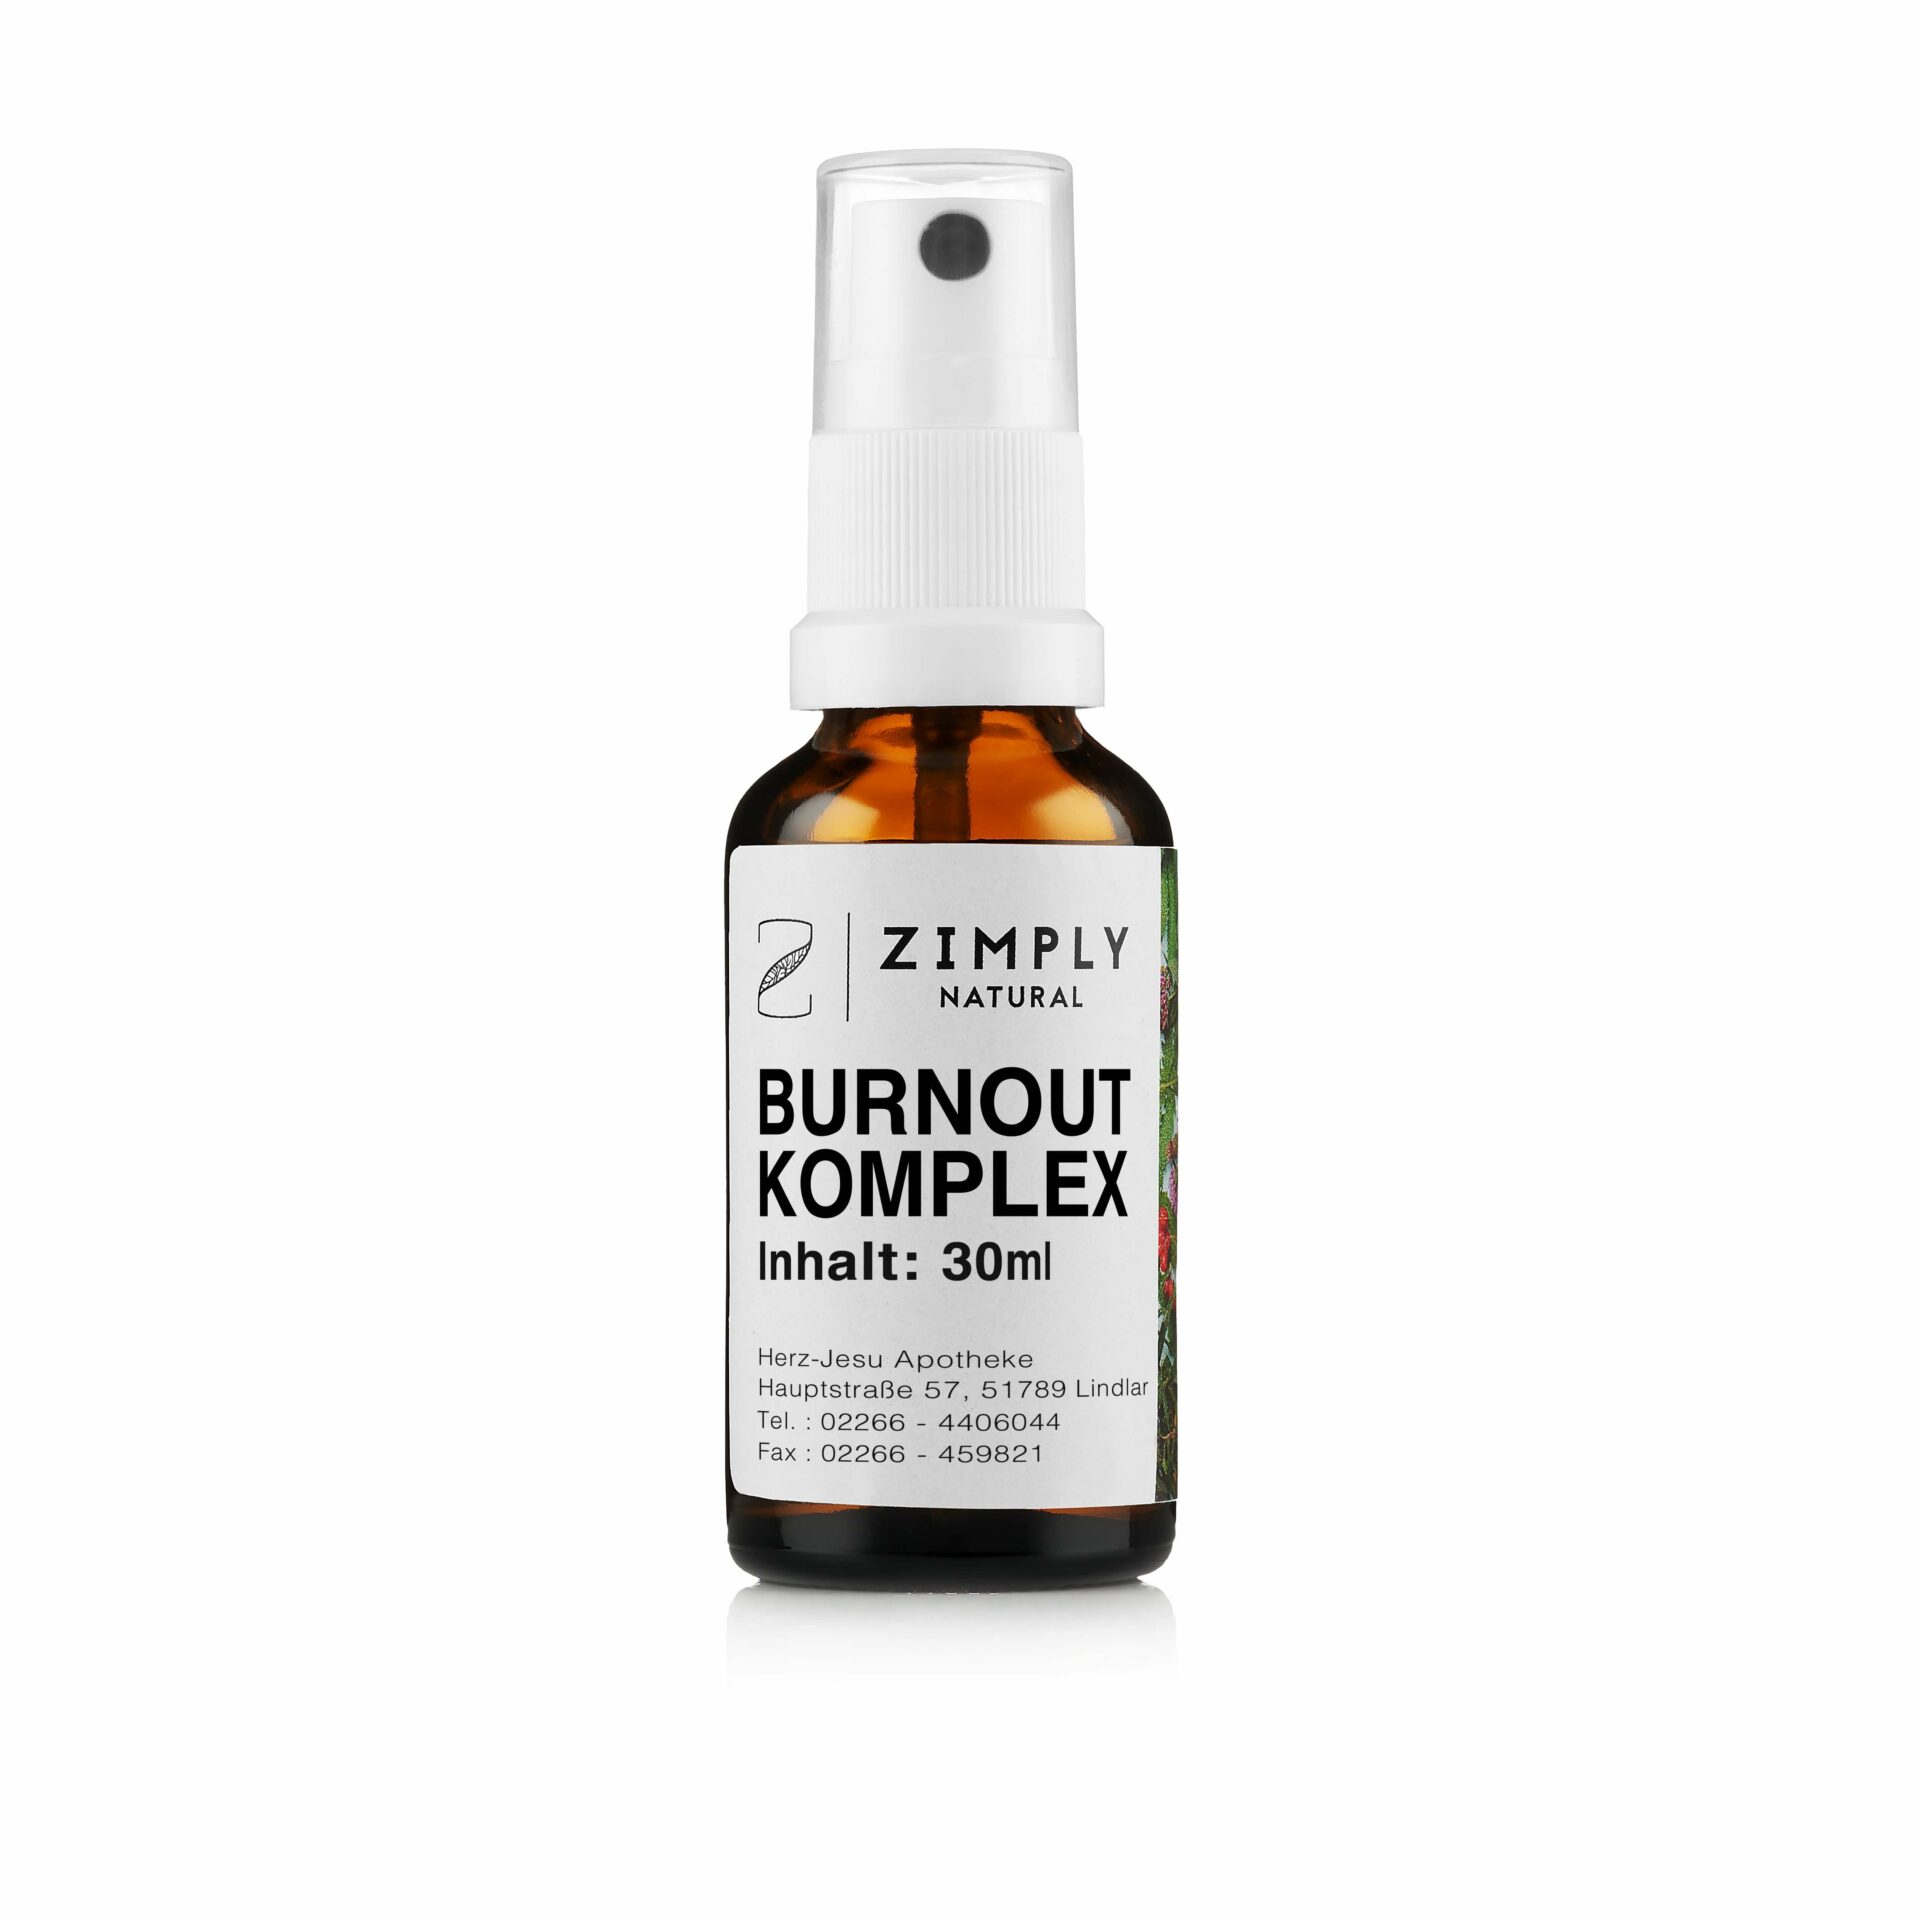 The Zimply Natural BurnoutKomplex mixture for spraying into the mouth.